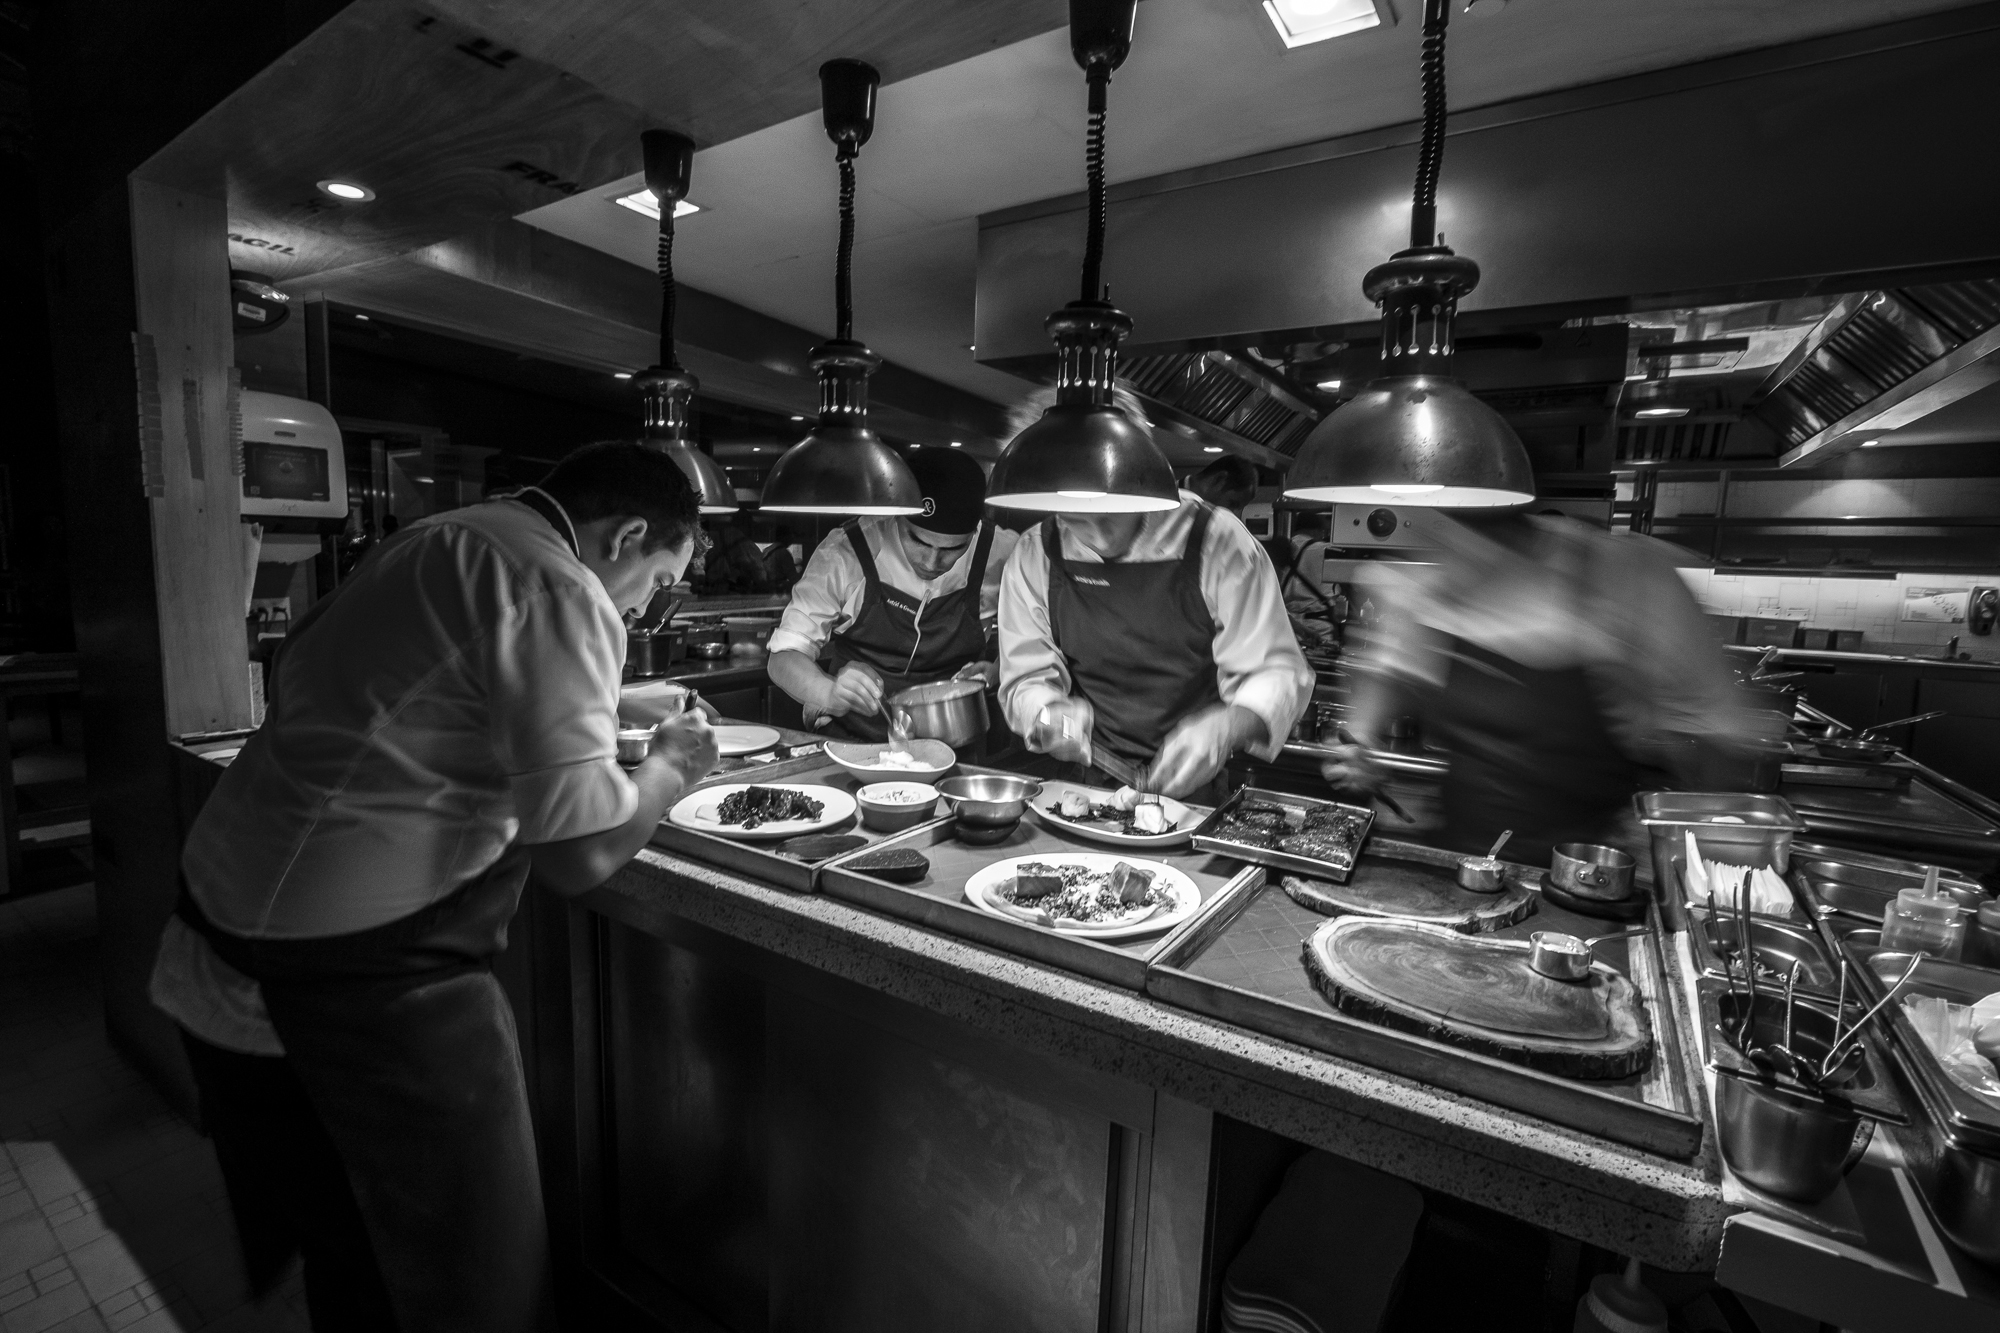 Chef Gastón Acurio at work with his team in the kitchen